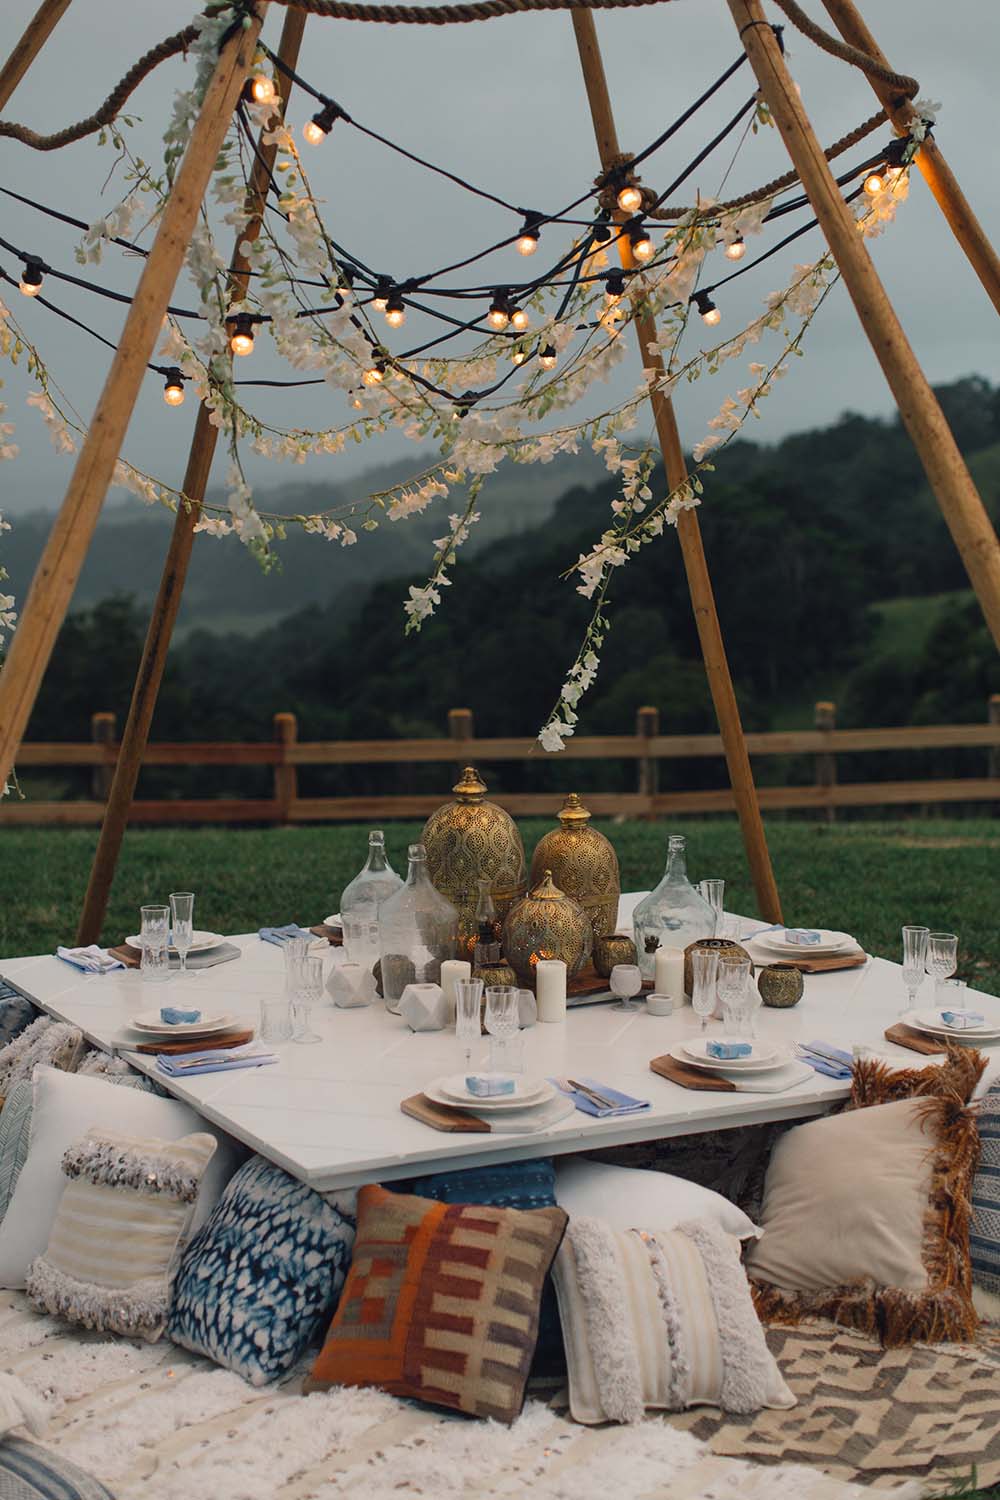 At Dusk Tweed Hinterland Styled Shoot Bramblewood Farm | The Events Lounge - Gold Coast Wedding Planner and Stylist - www.theeventslounge.com.au